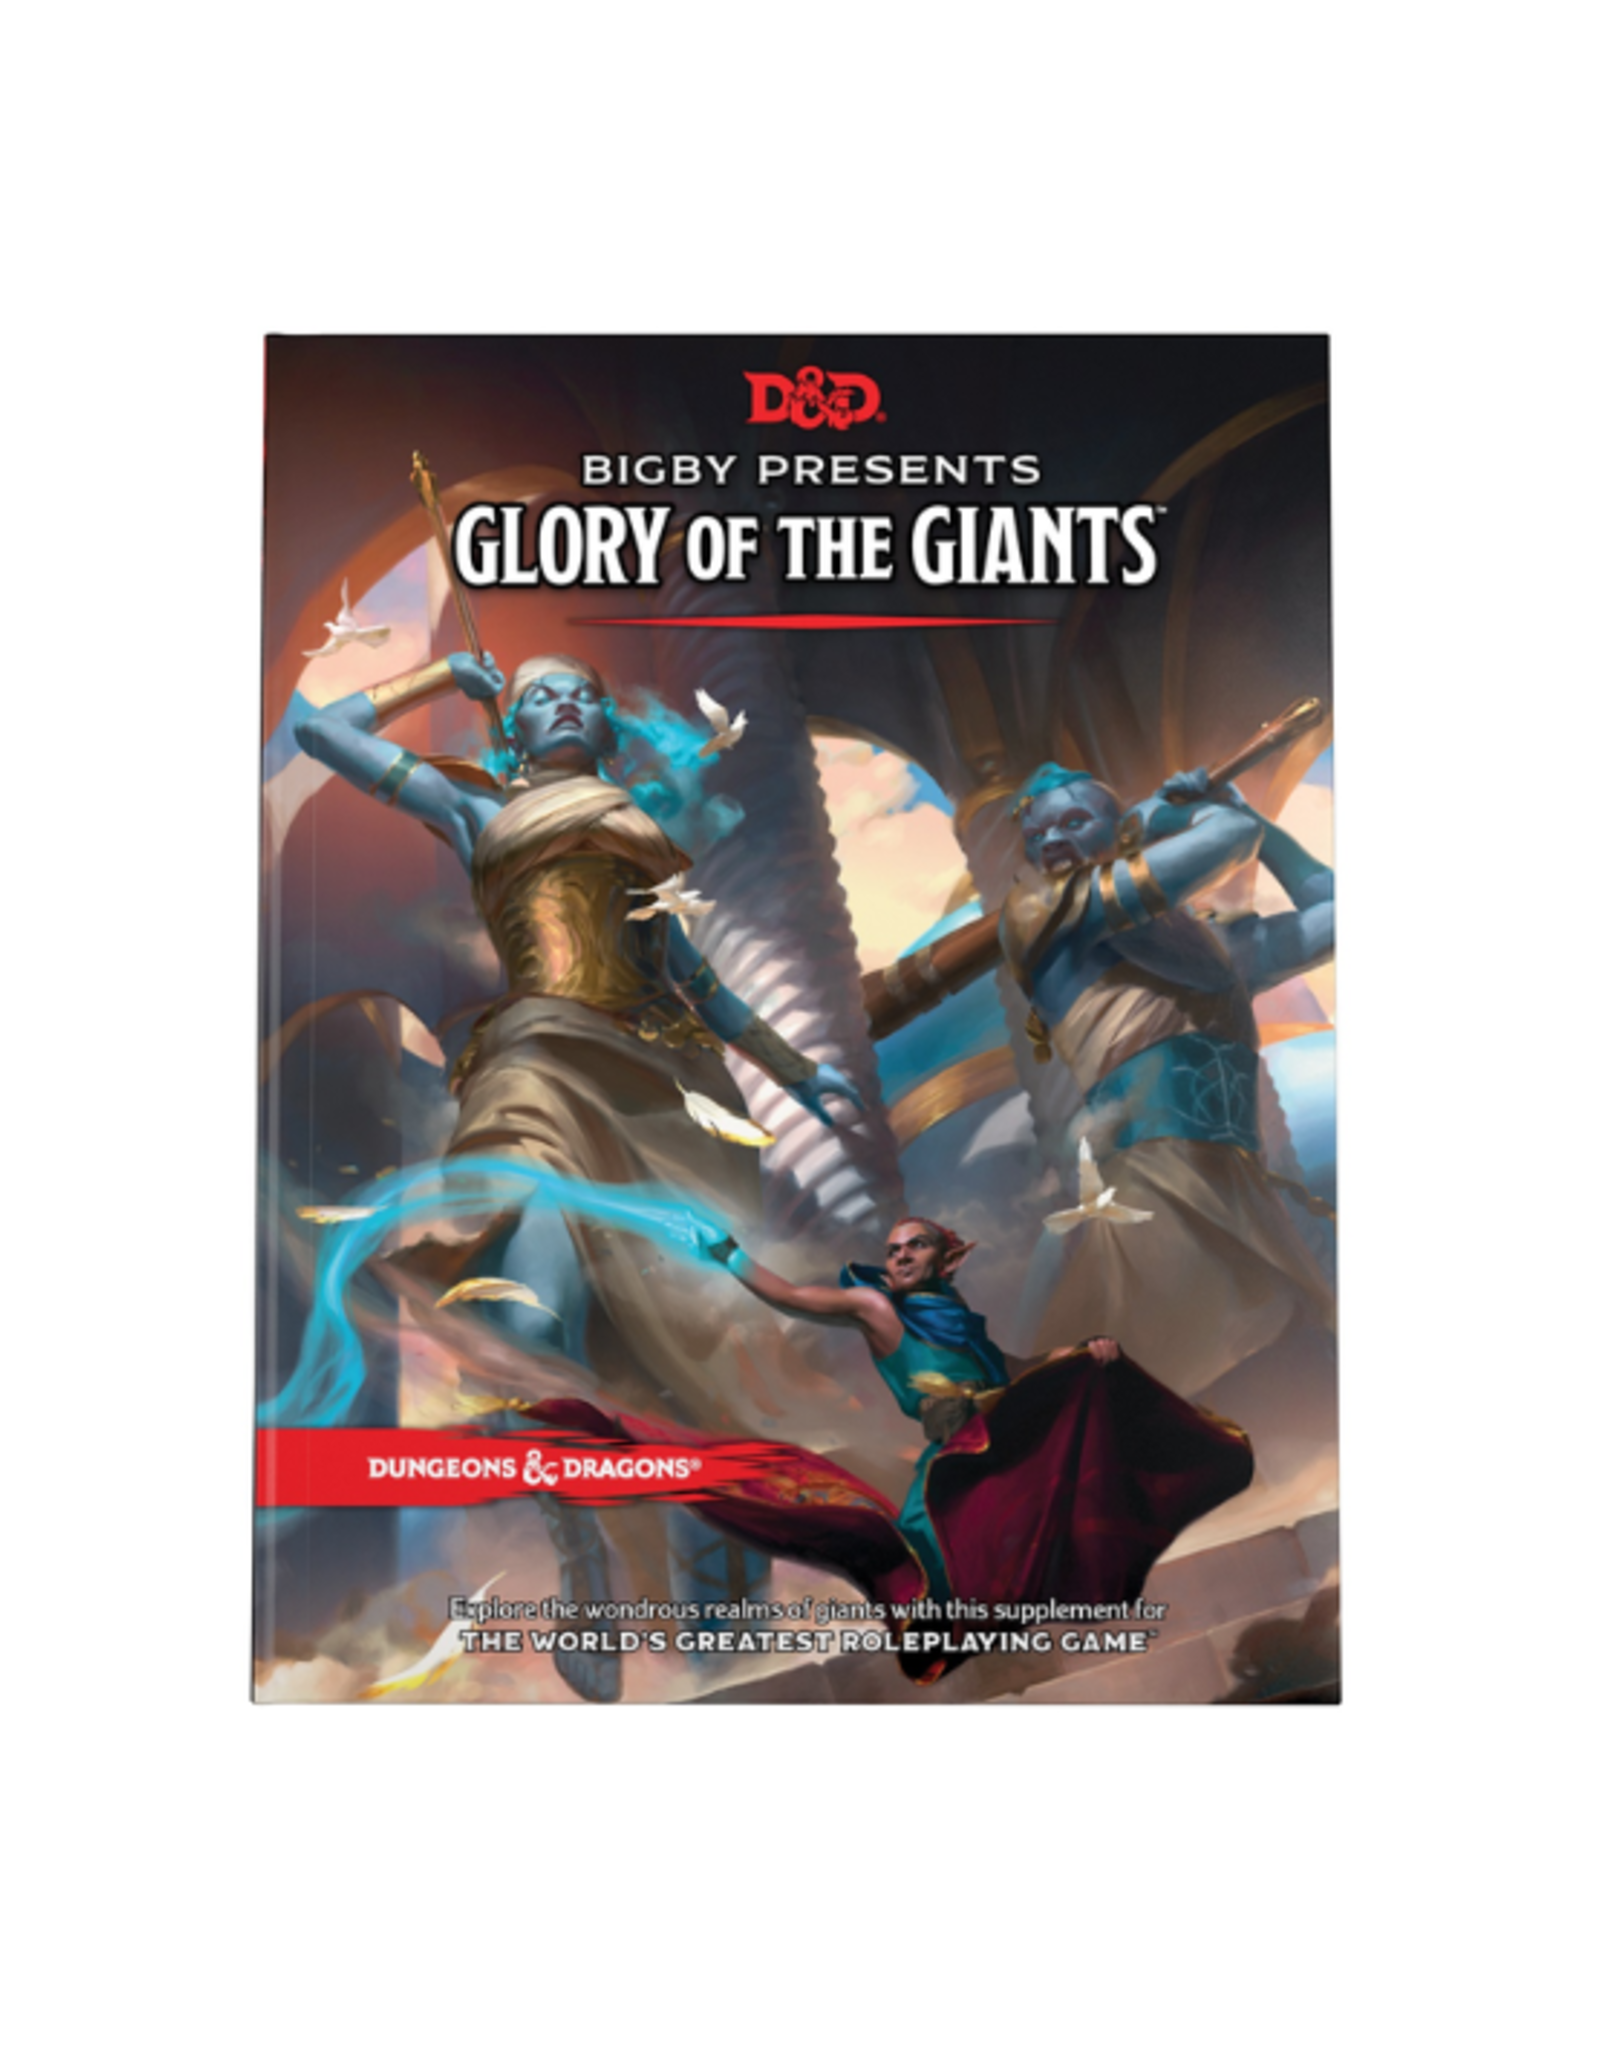 Dungeons & Dragons -  Bigby Presents Glory of the Giants HC